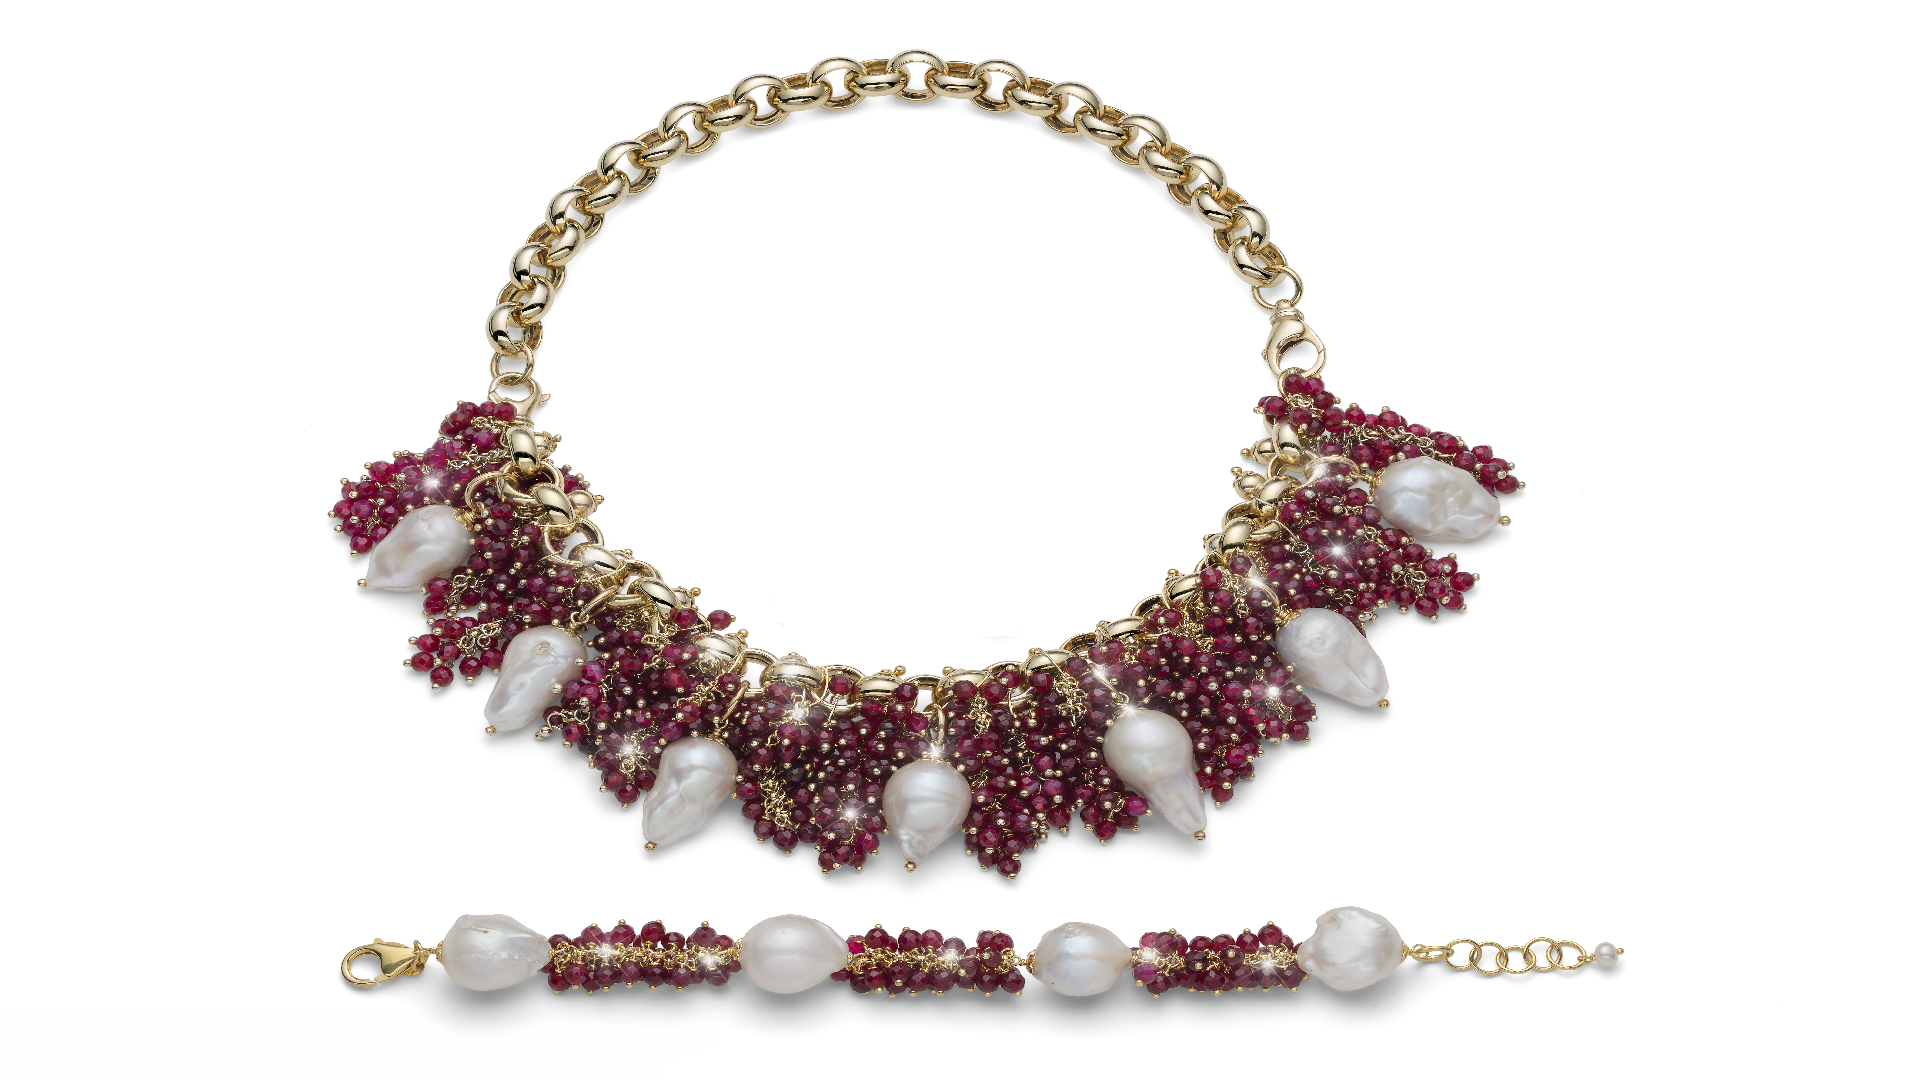 golden bracelet with red stones and white pearls